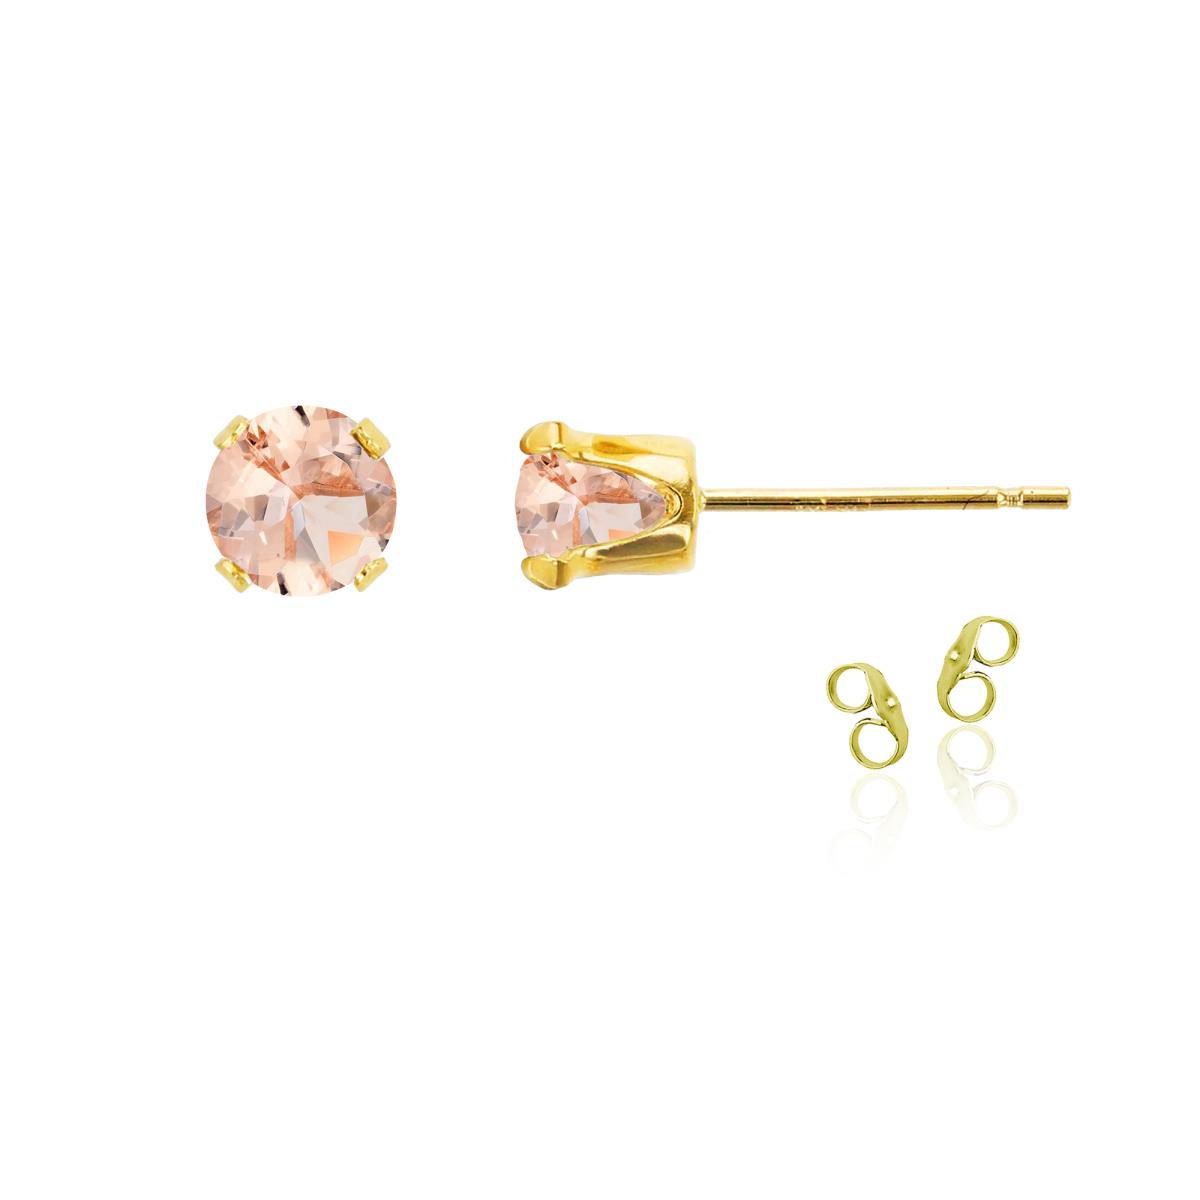 Sterling Silver Yellow 7mm Round Morganite Stud Earring with Clutch